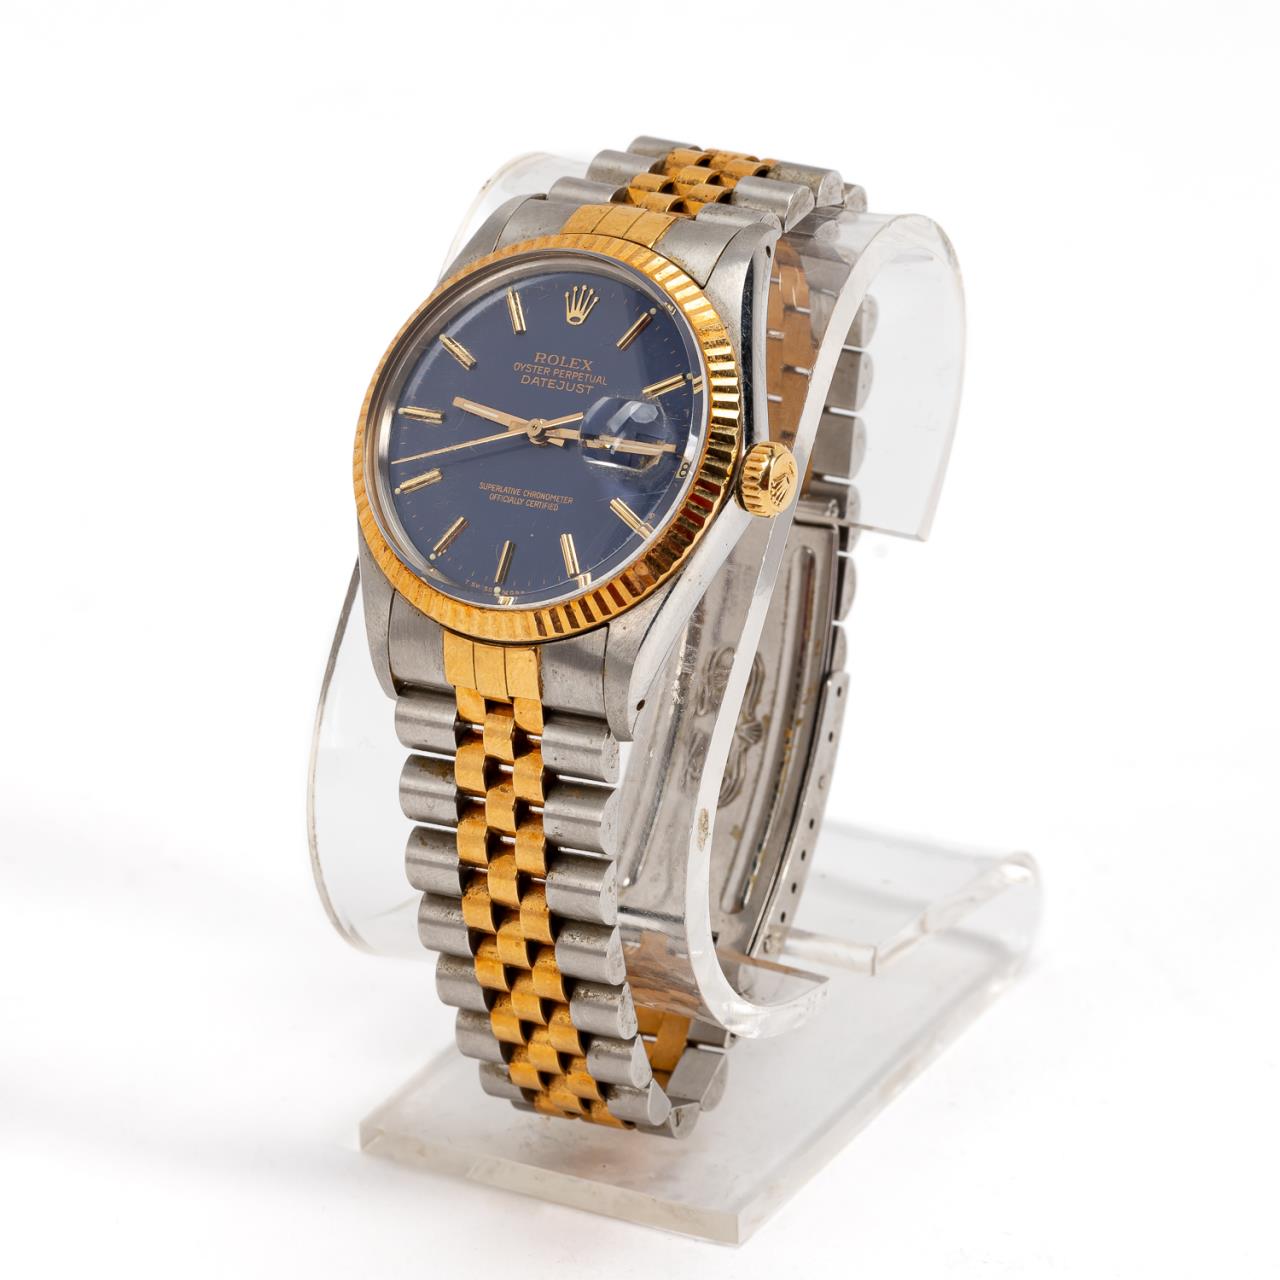 MENS' ROLEX TWO-TONE DATEJUST WITH